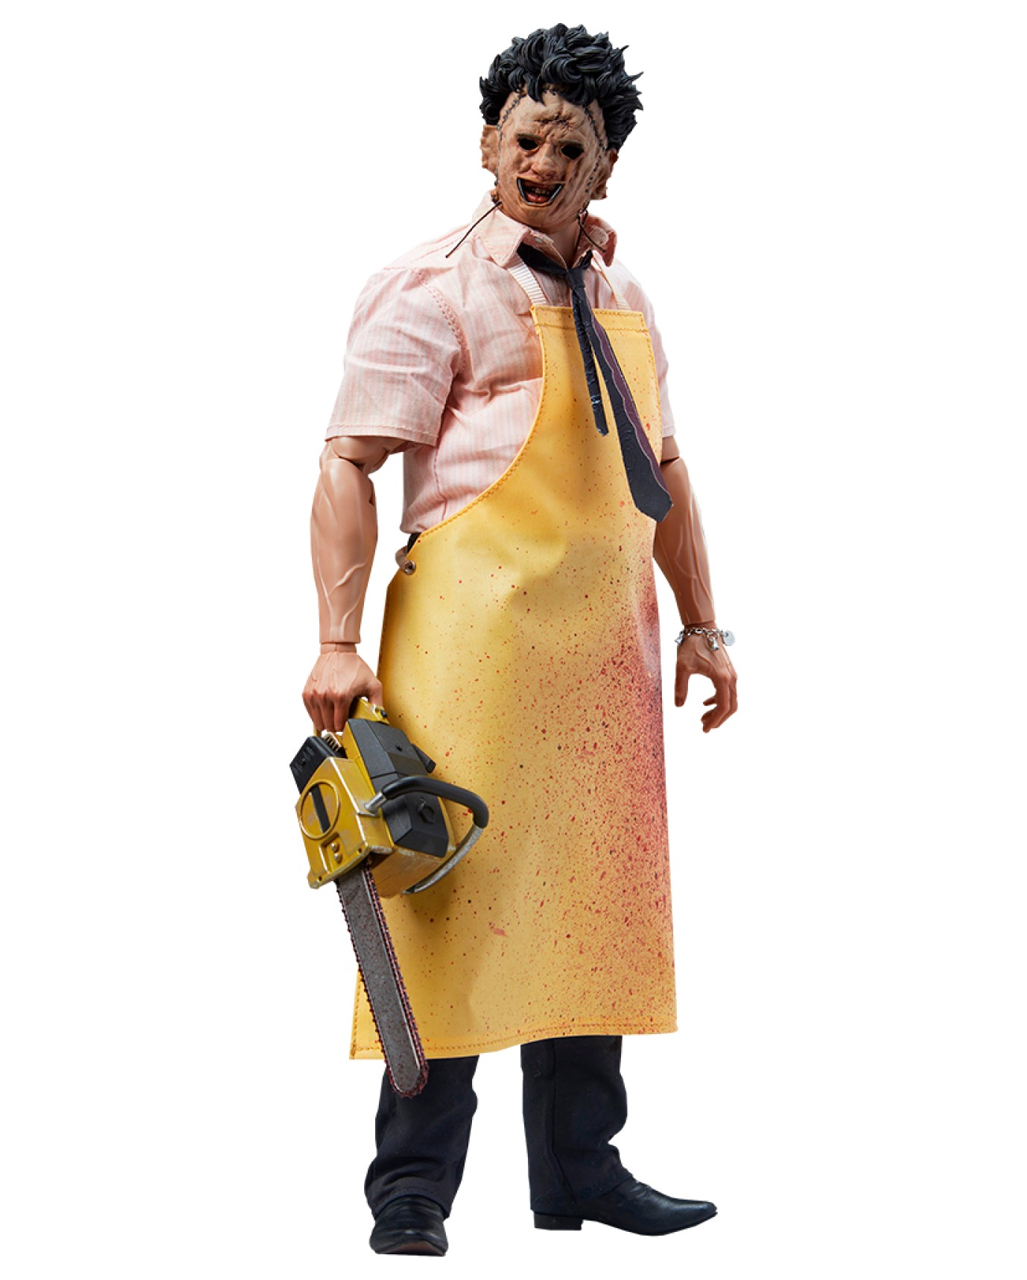 Texas Chainsaw Leatherface Killing Mask 1/6 Actionfigur 30cm ★